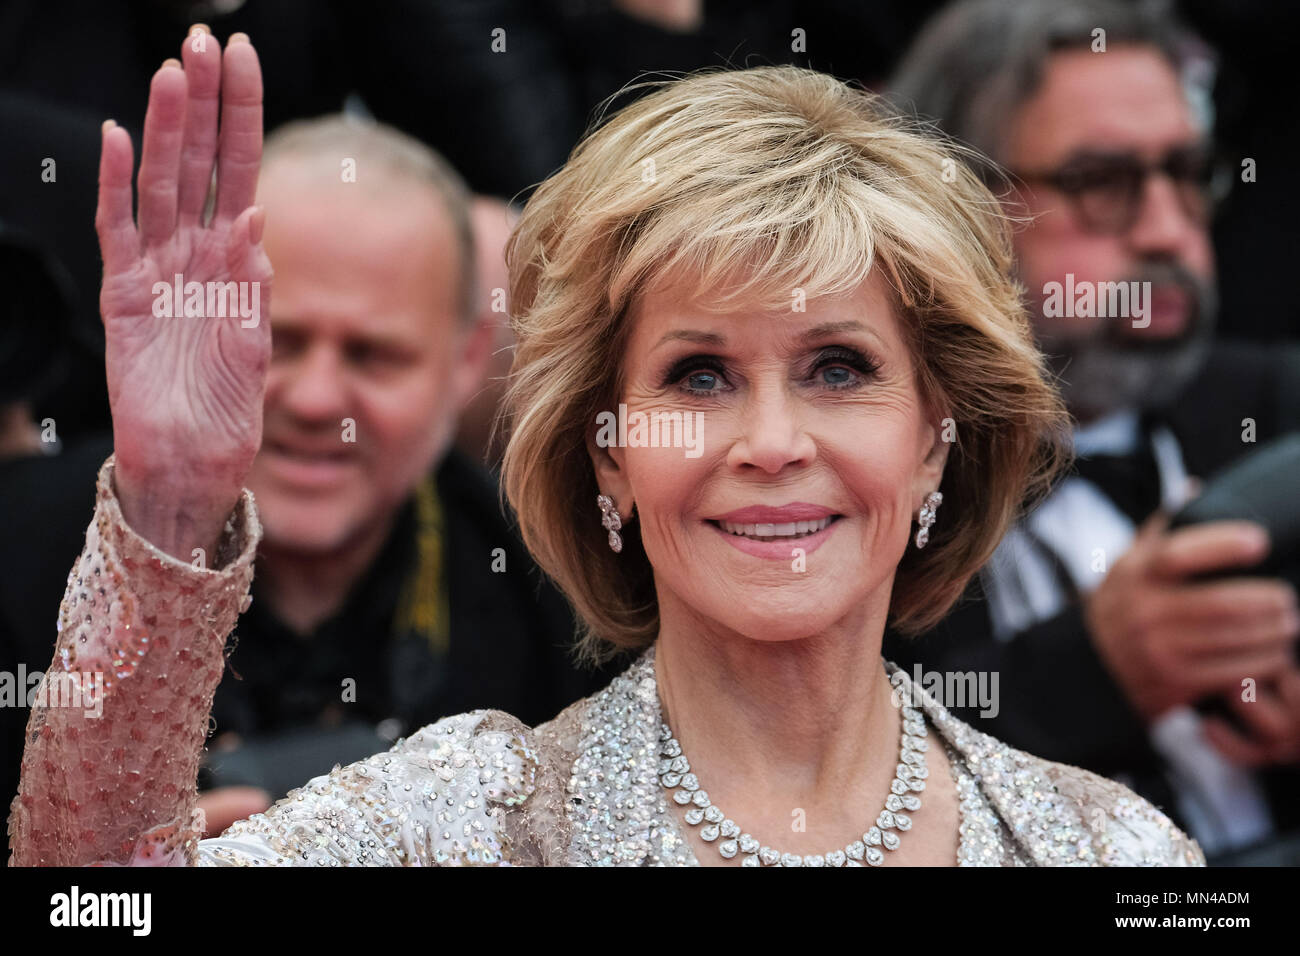 Cannes, France. 14th May, 2018. Jane Fonda on the 'BlacKkKlansman' Red Carpet on Monday 14 May 2018 as part of the 71st International Cannes Film Festival held at Palais des Festivals, Cannes. Pictured: Jane Fonda. Picture by Credit: Julie Edwards/Alamy Live News Stock Photo